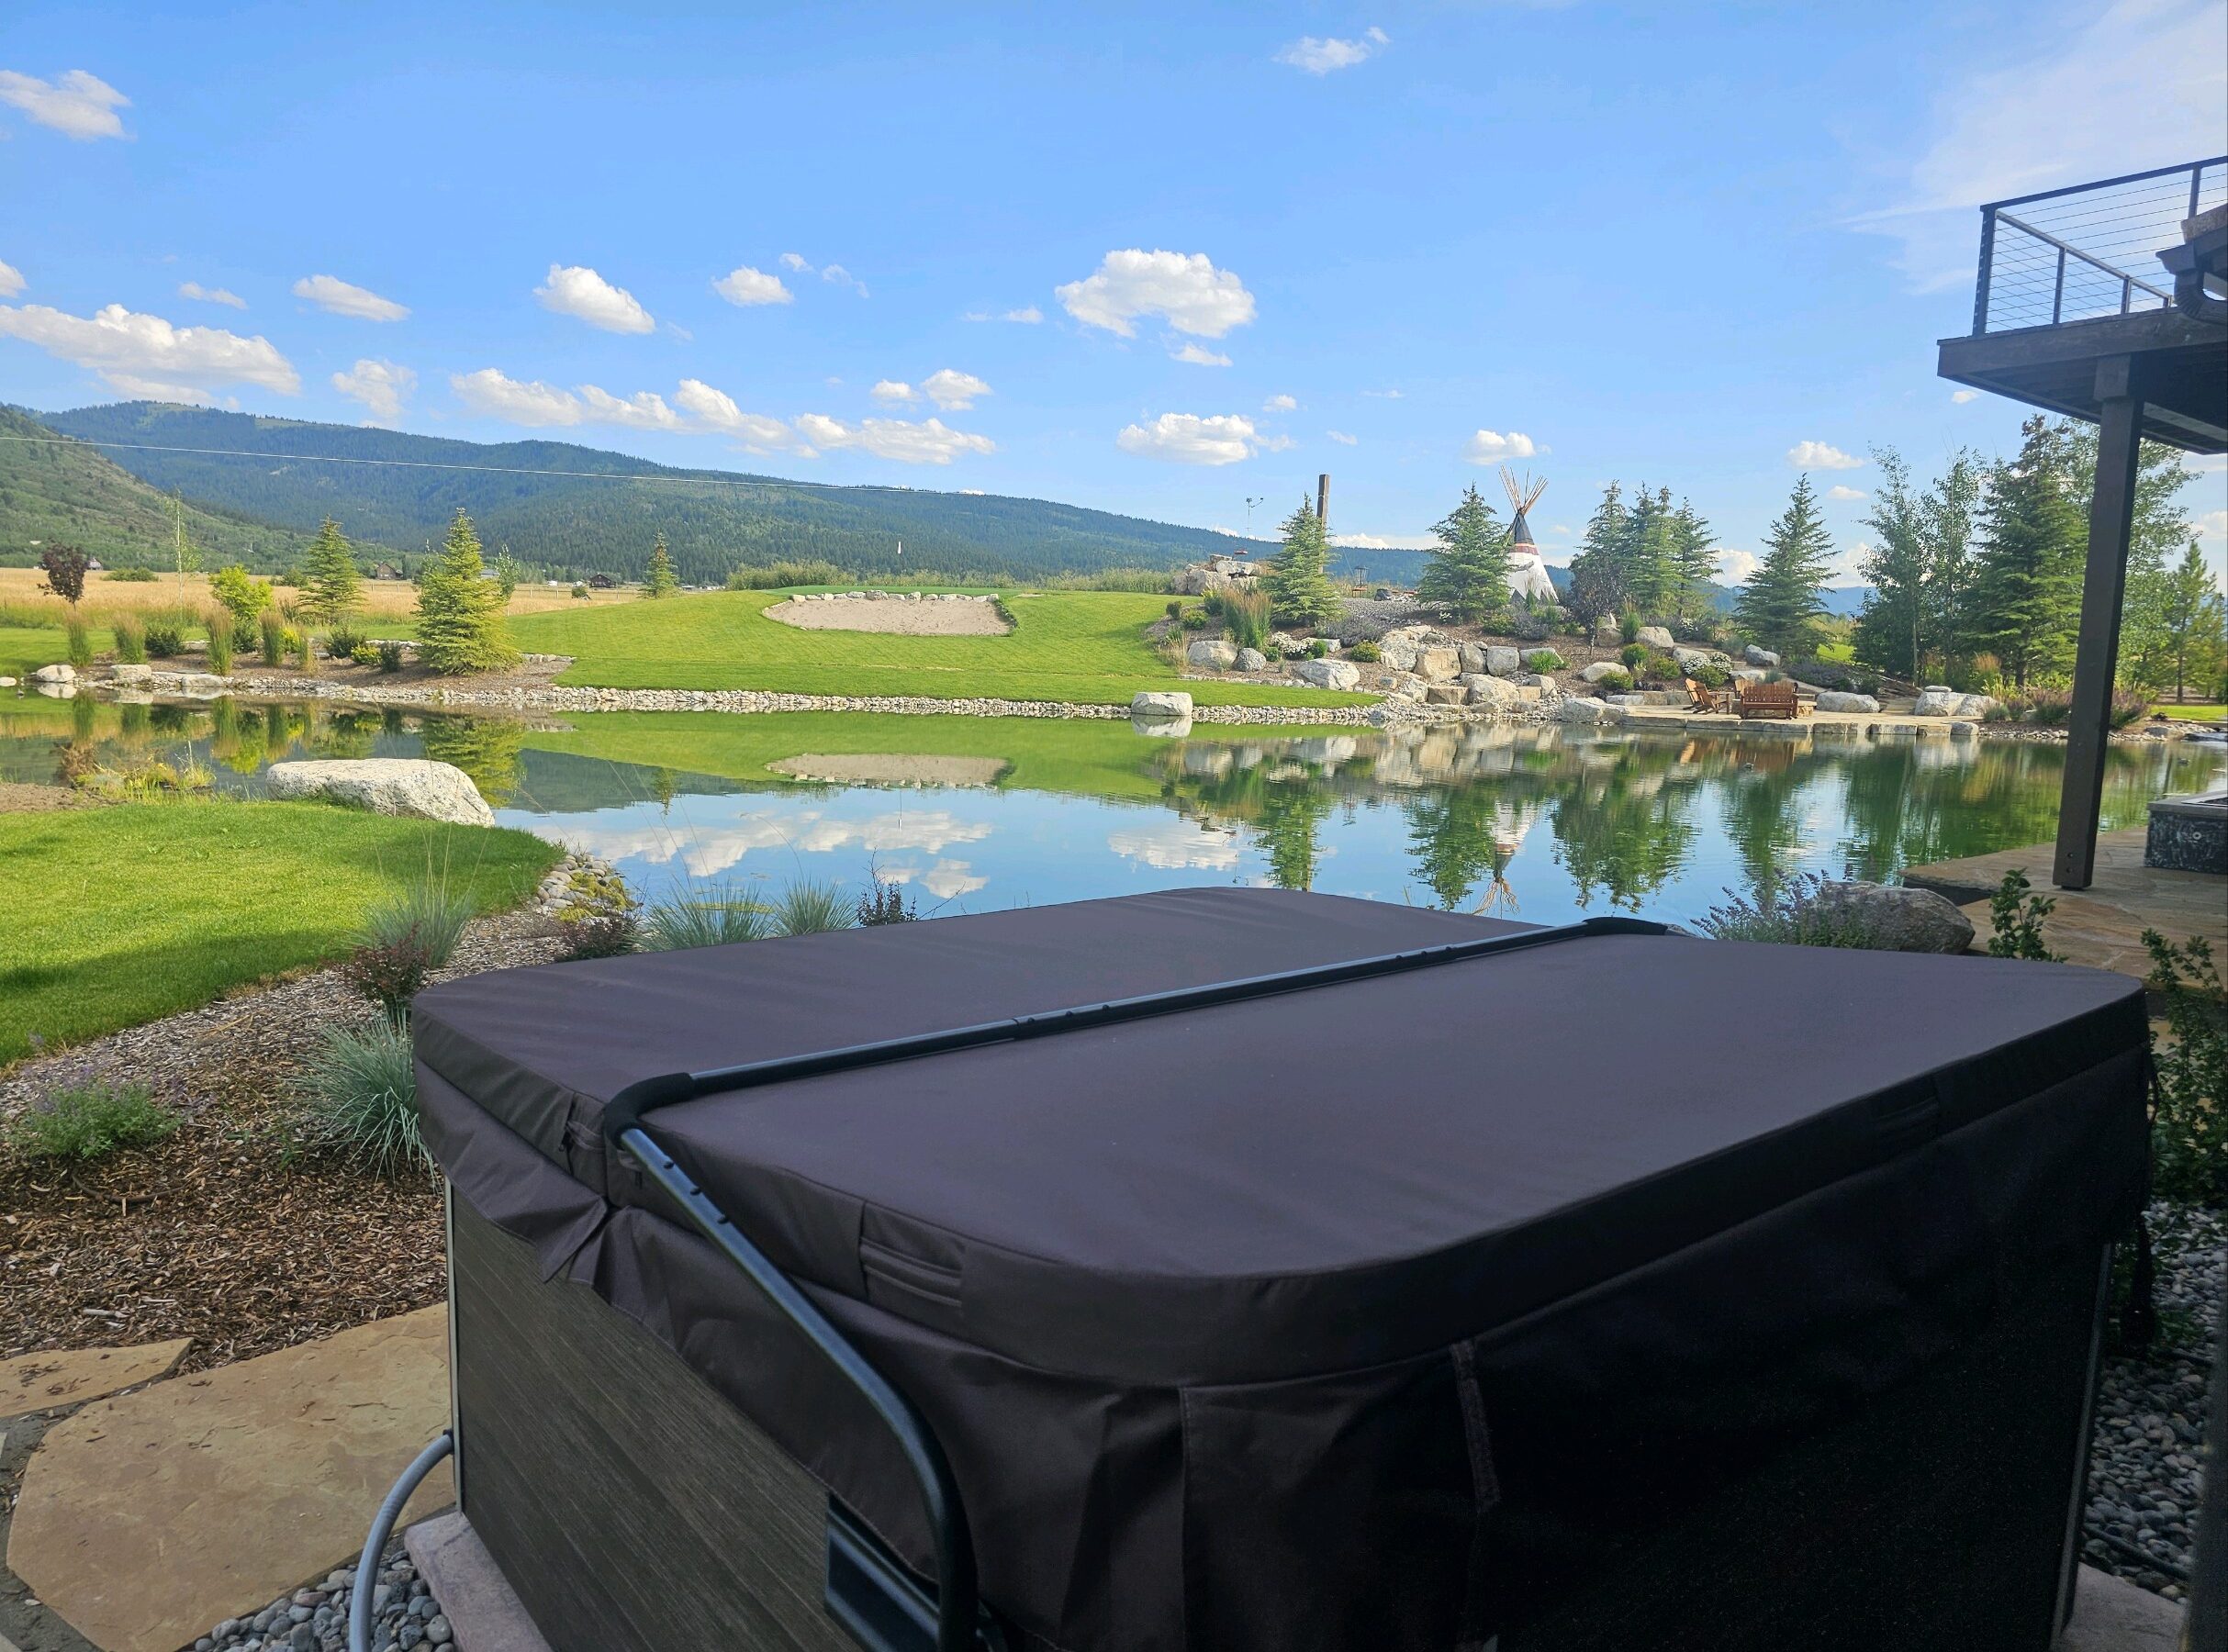 Artesian Elite Dove Canyon installed by Davison Spas in Teton Valley, ID. Closed cover